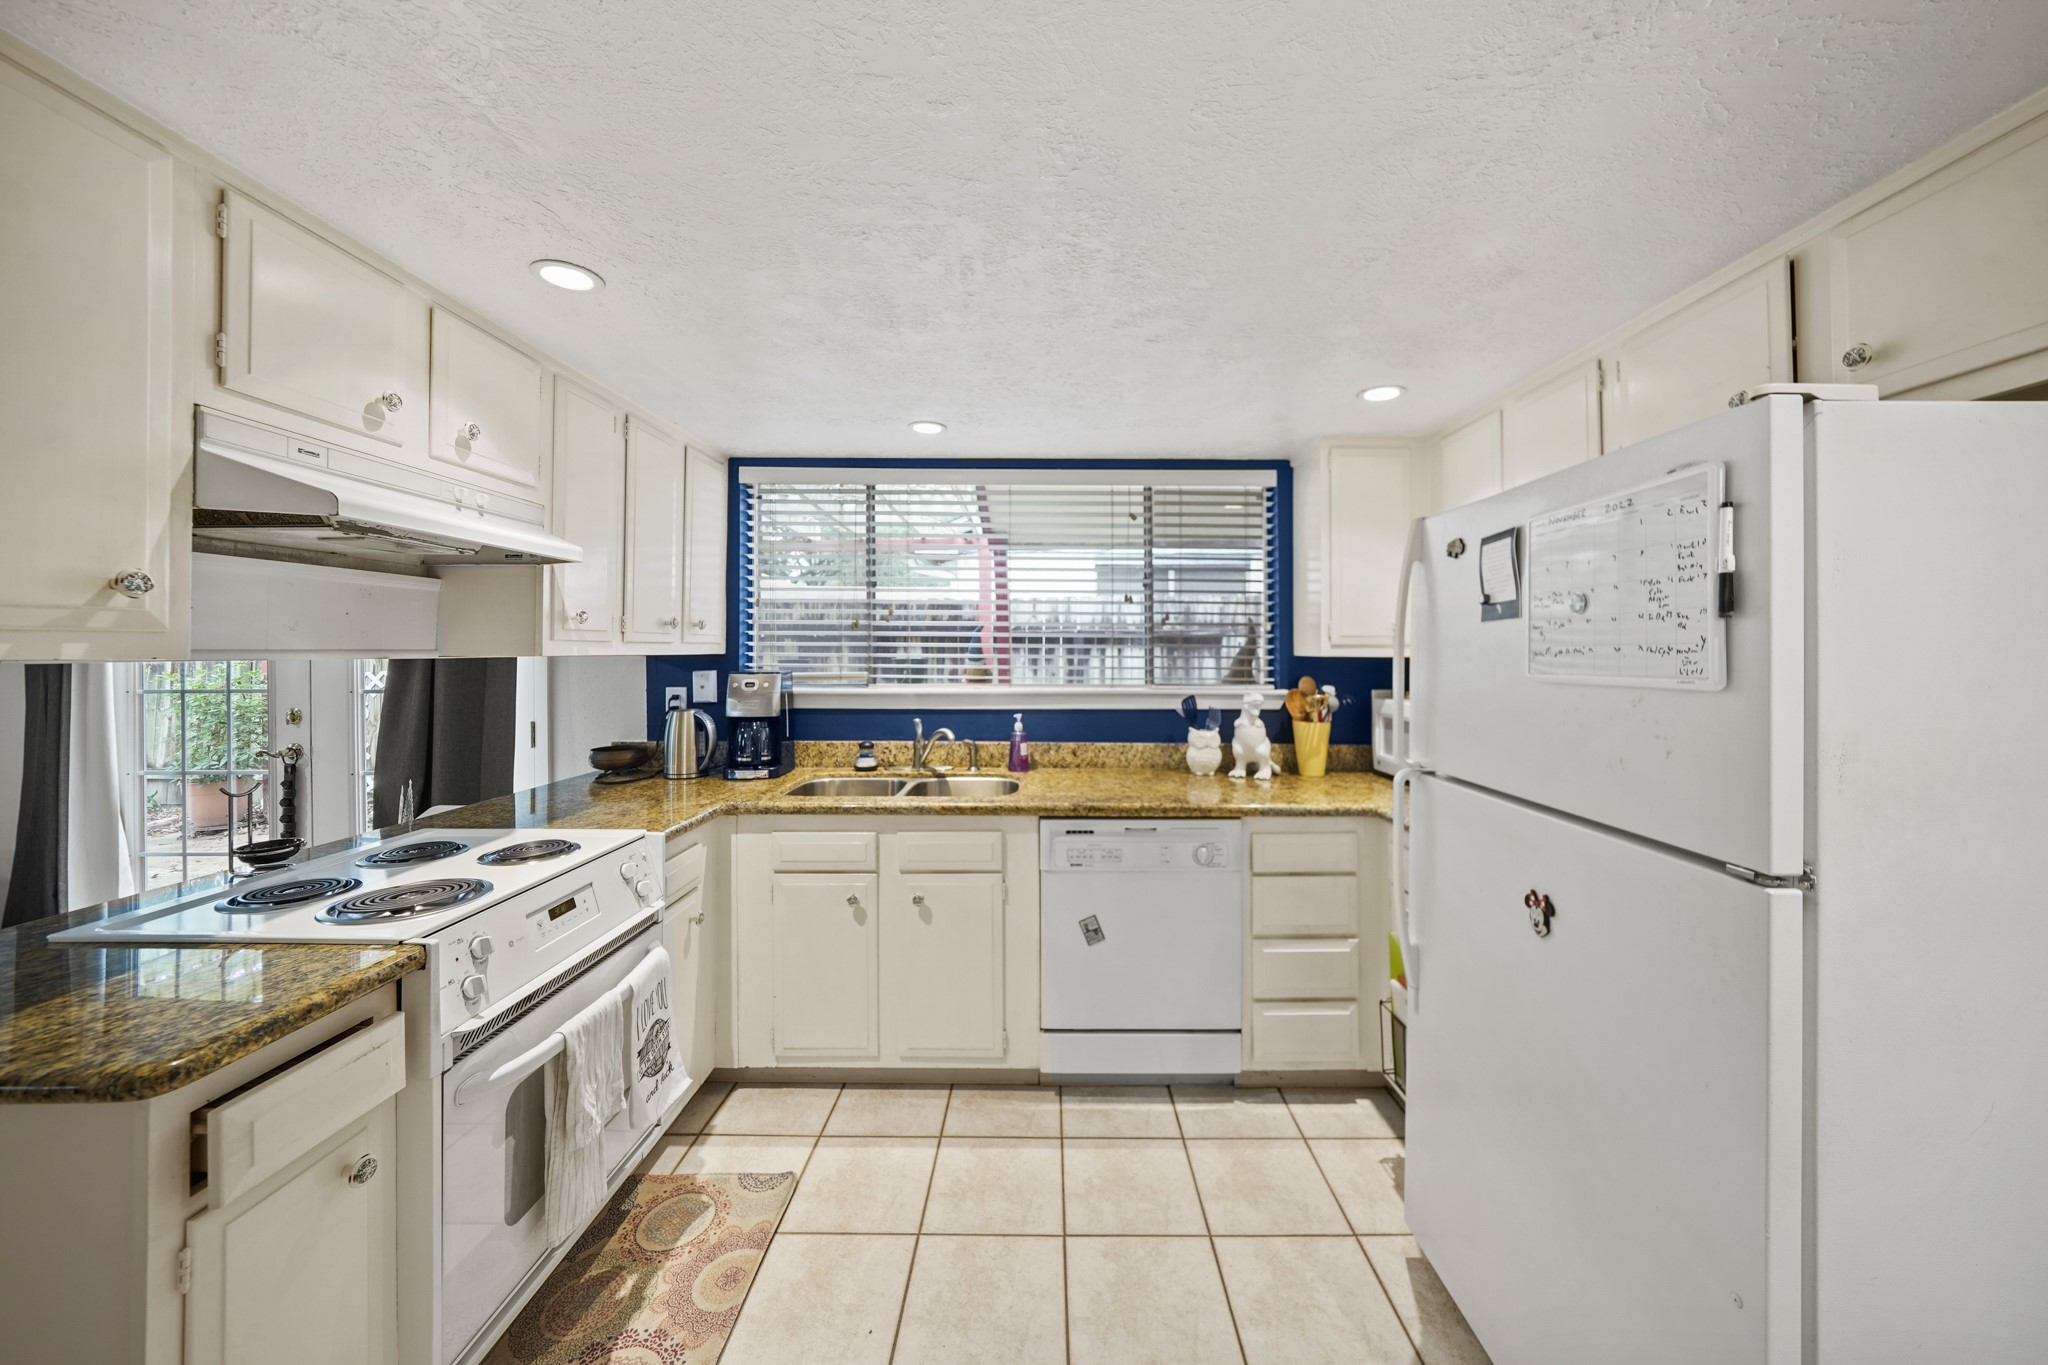 Show off your culinary skills in this immaculate kitchen featuring tile floors, granite countertops, designer paint, and lots of cabinet space.